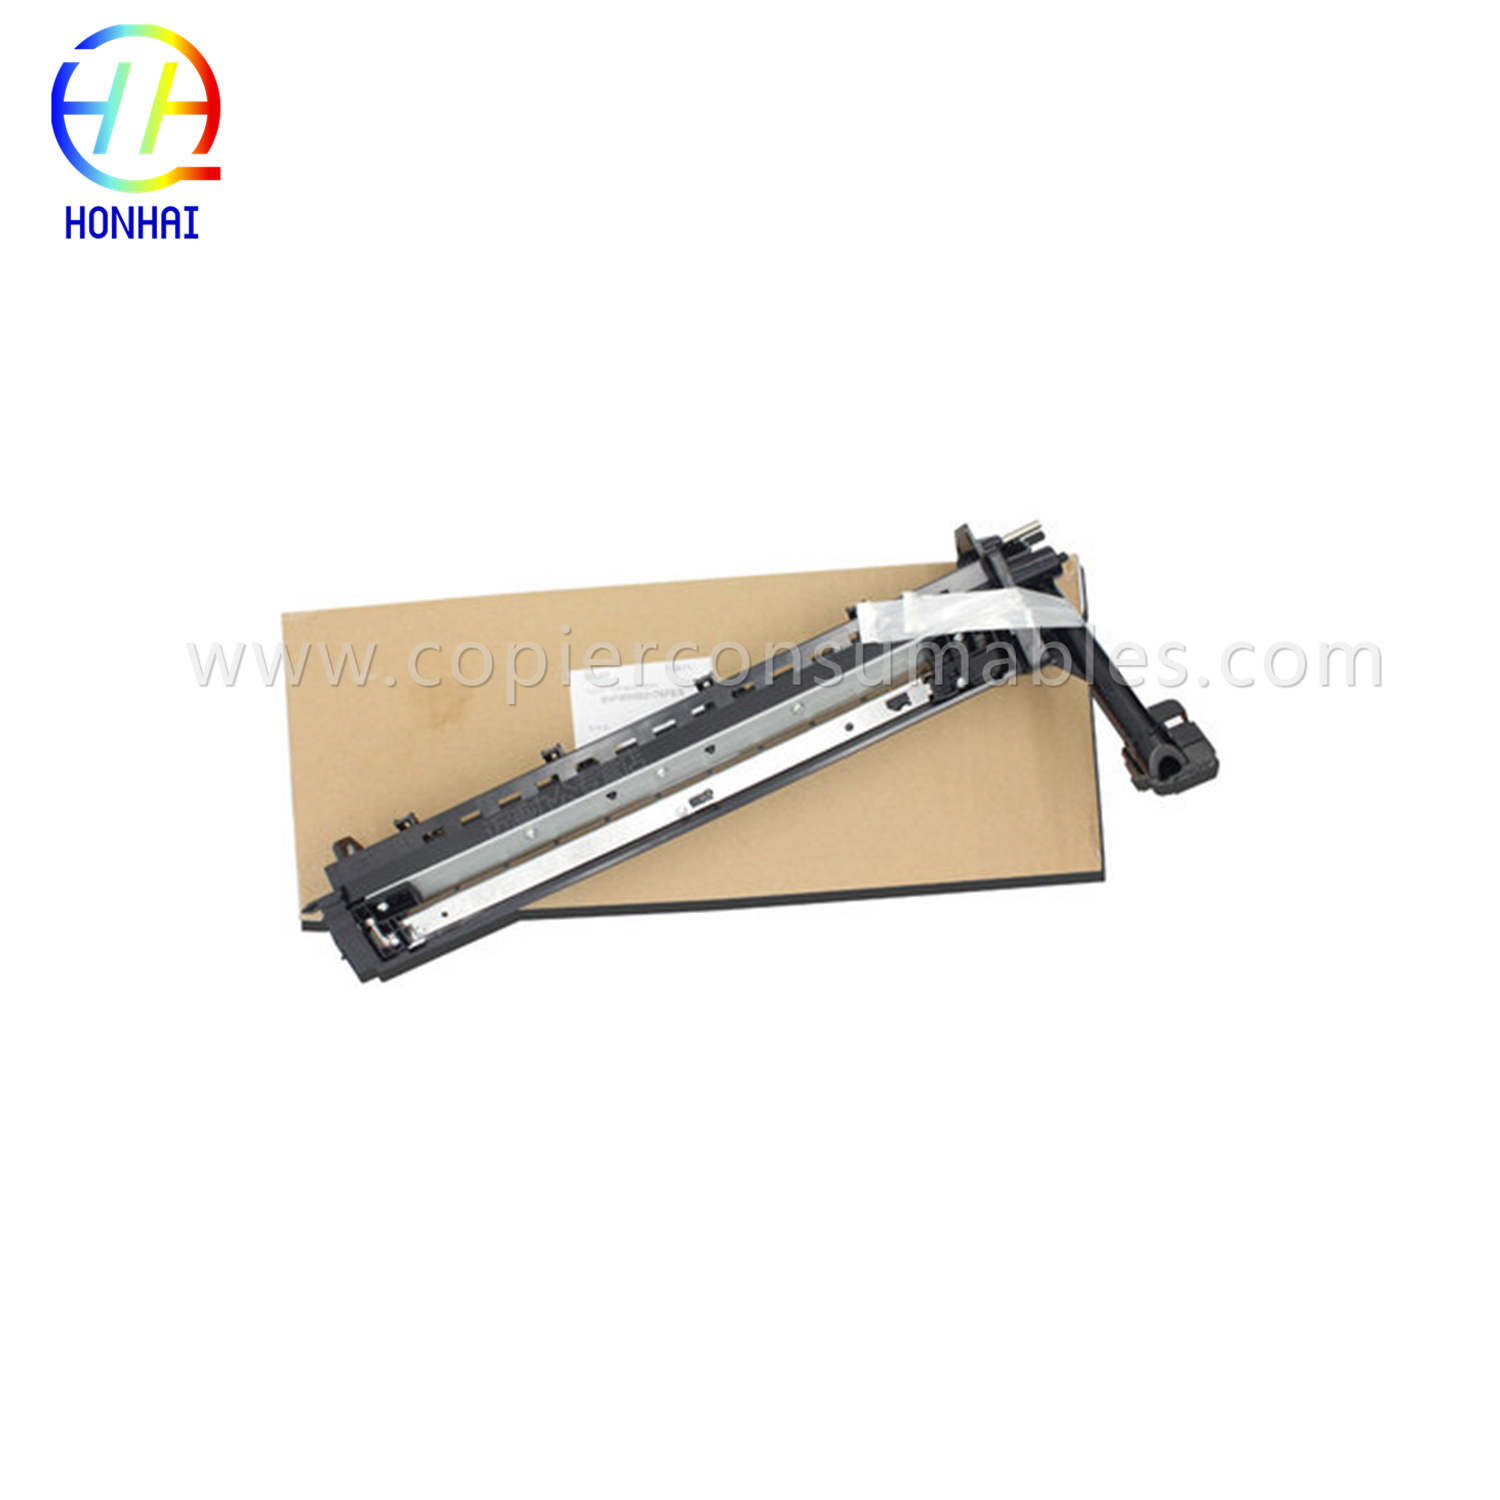 Drum Frame Assembly foar Sharp Ar-5320 5320d Arm-160 162 205 207 (Sharp CFRM-0021RS5T CFRM-0021RS6D Toshiba 6LS11678000)